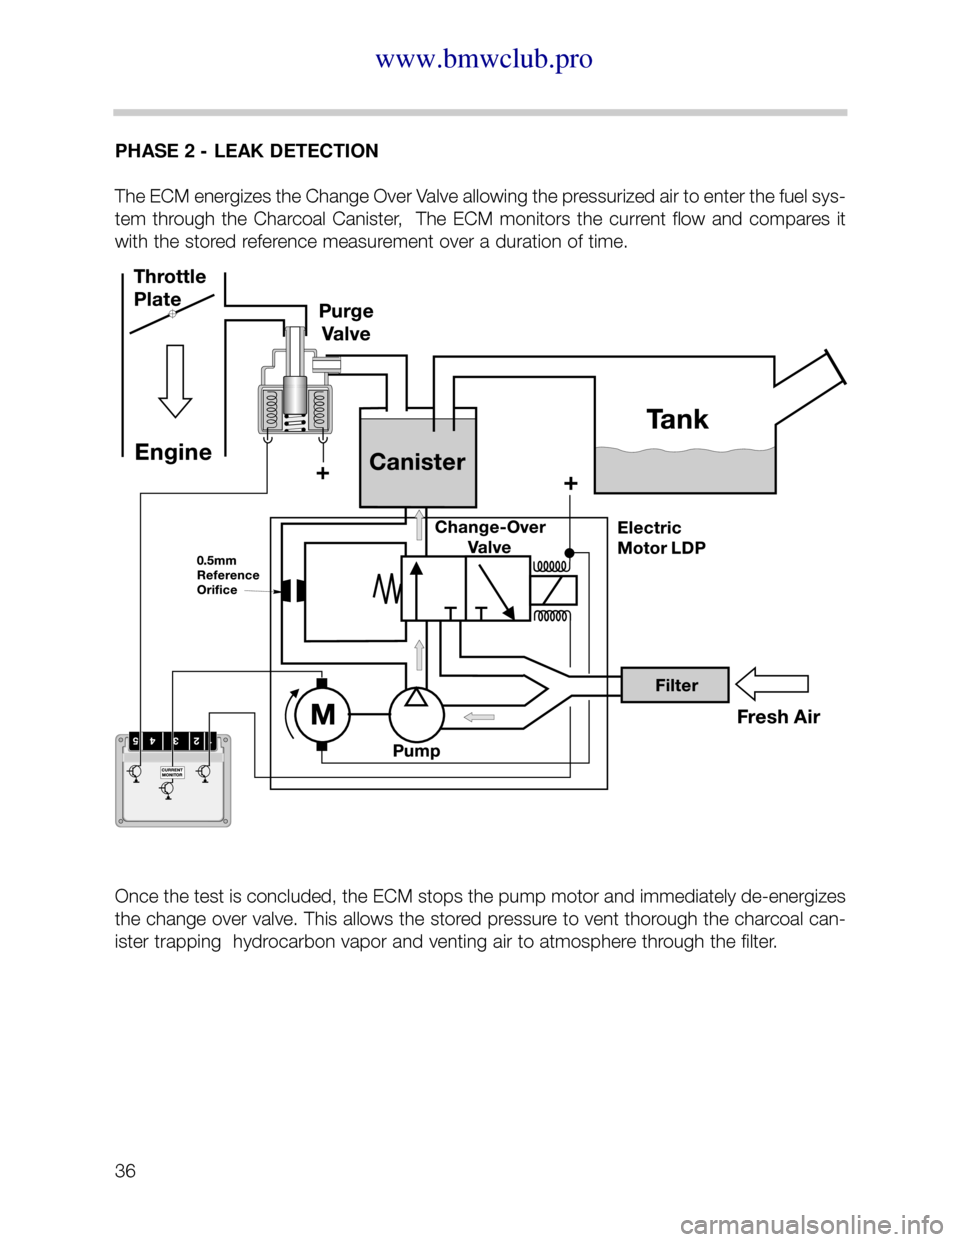 BMW 535i 2001 E39 M62TU Engine Workshop Manual PHASE 2 - LEAK DETECTION

The ECM energizes the Change Over Valve allowing the pressurized air to enter the fuel sys-

tem  through  the  Charcoal  Canister,    The  ECM  monitors  the  current  flow 